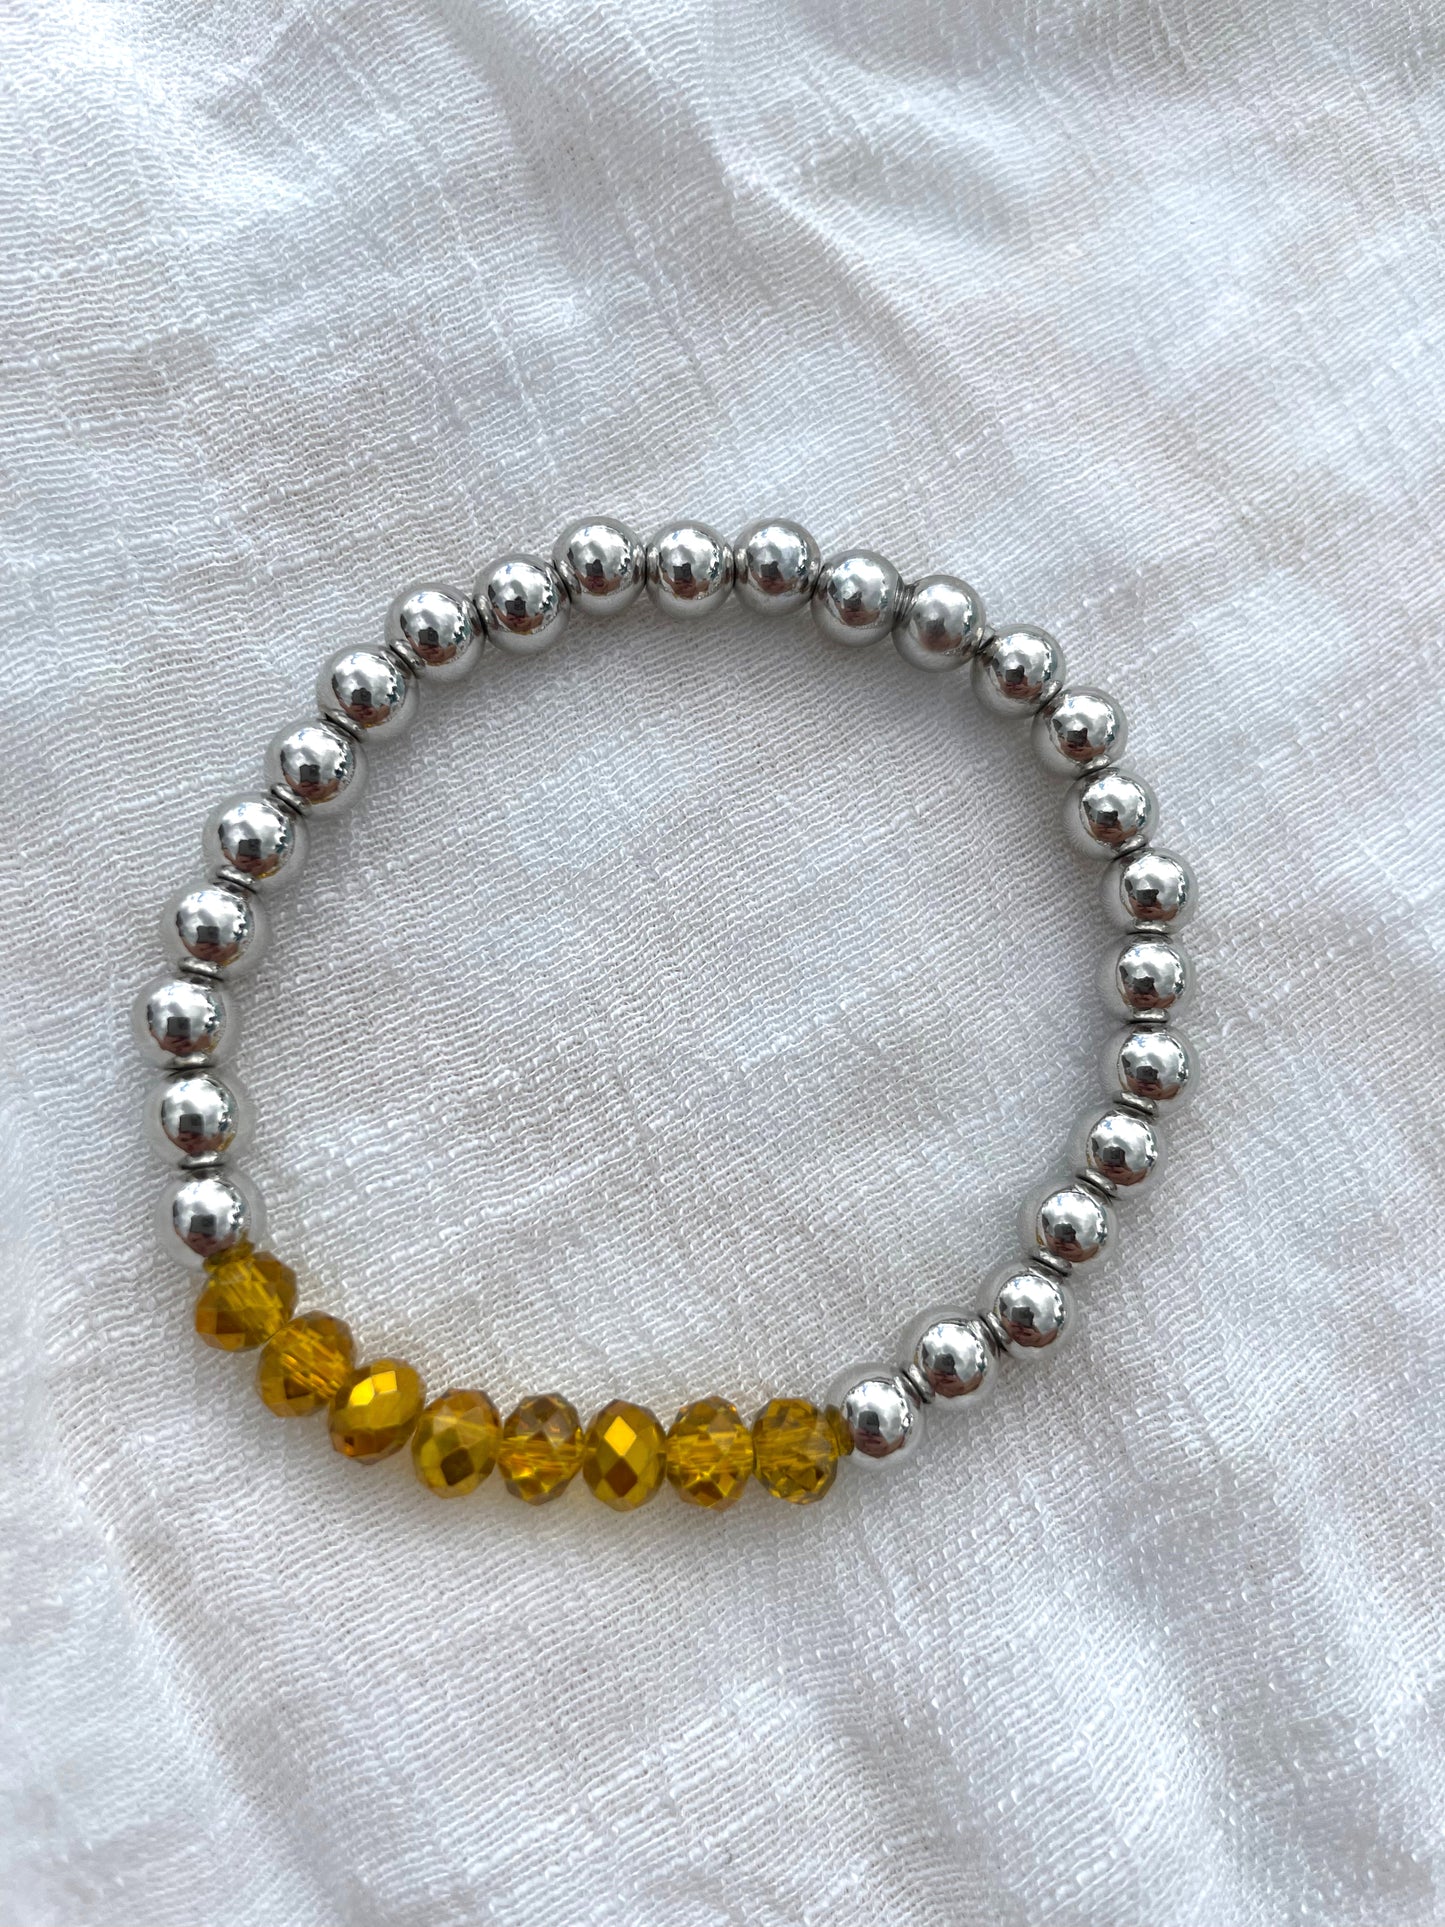 Silver and crystals bracelet